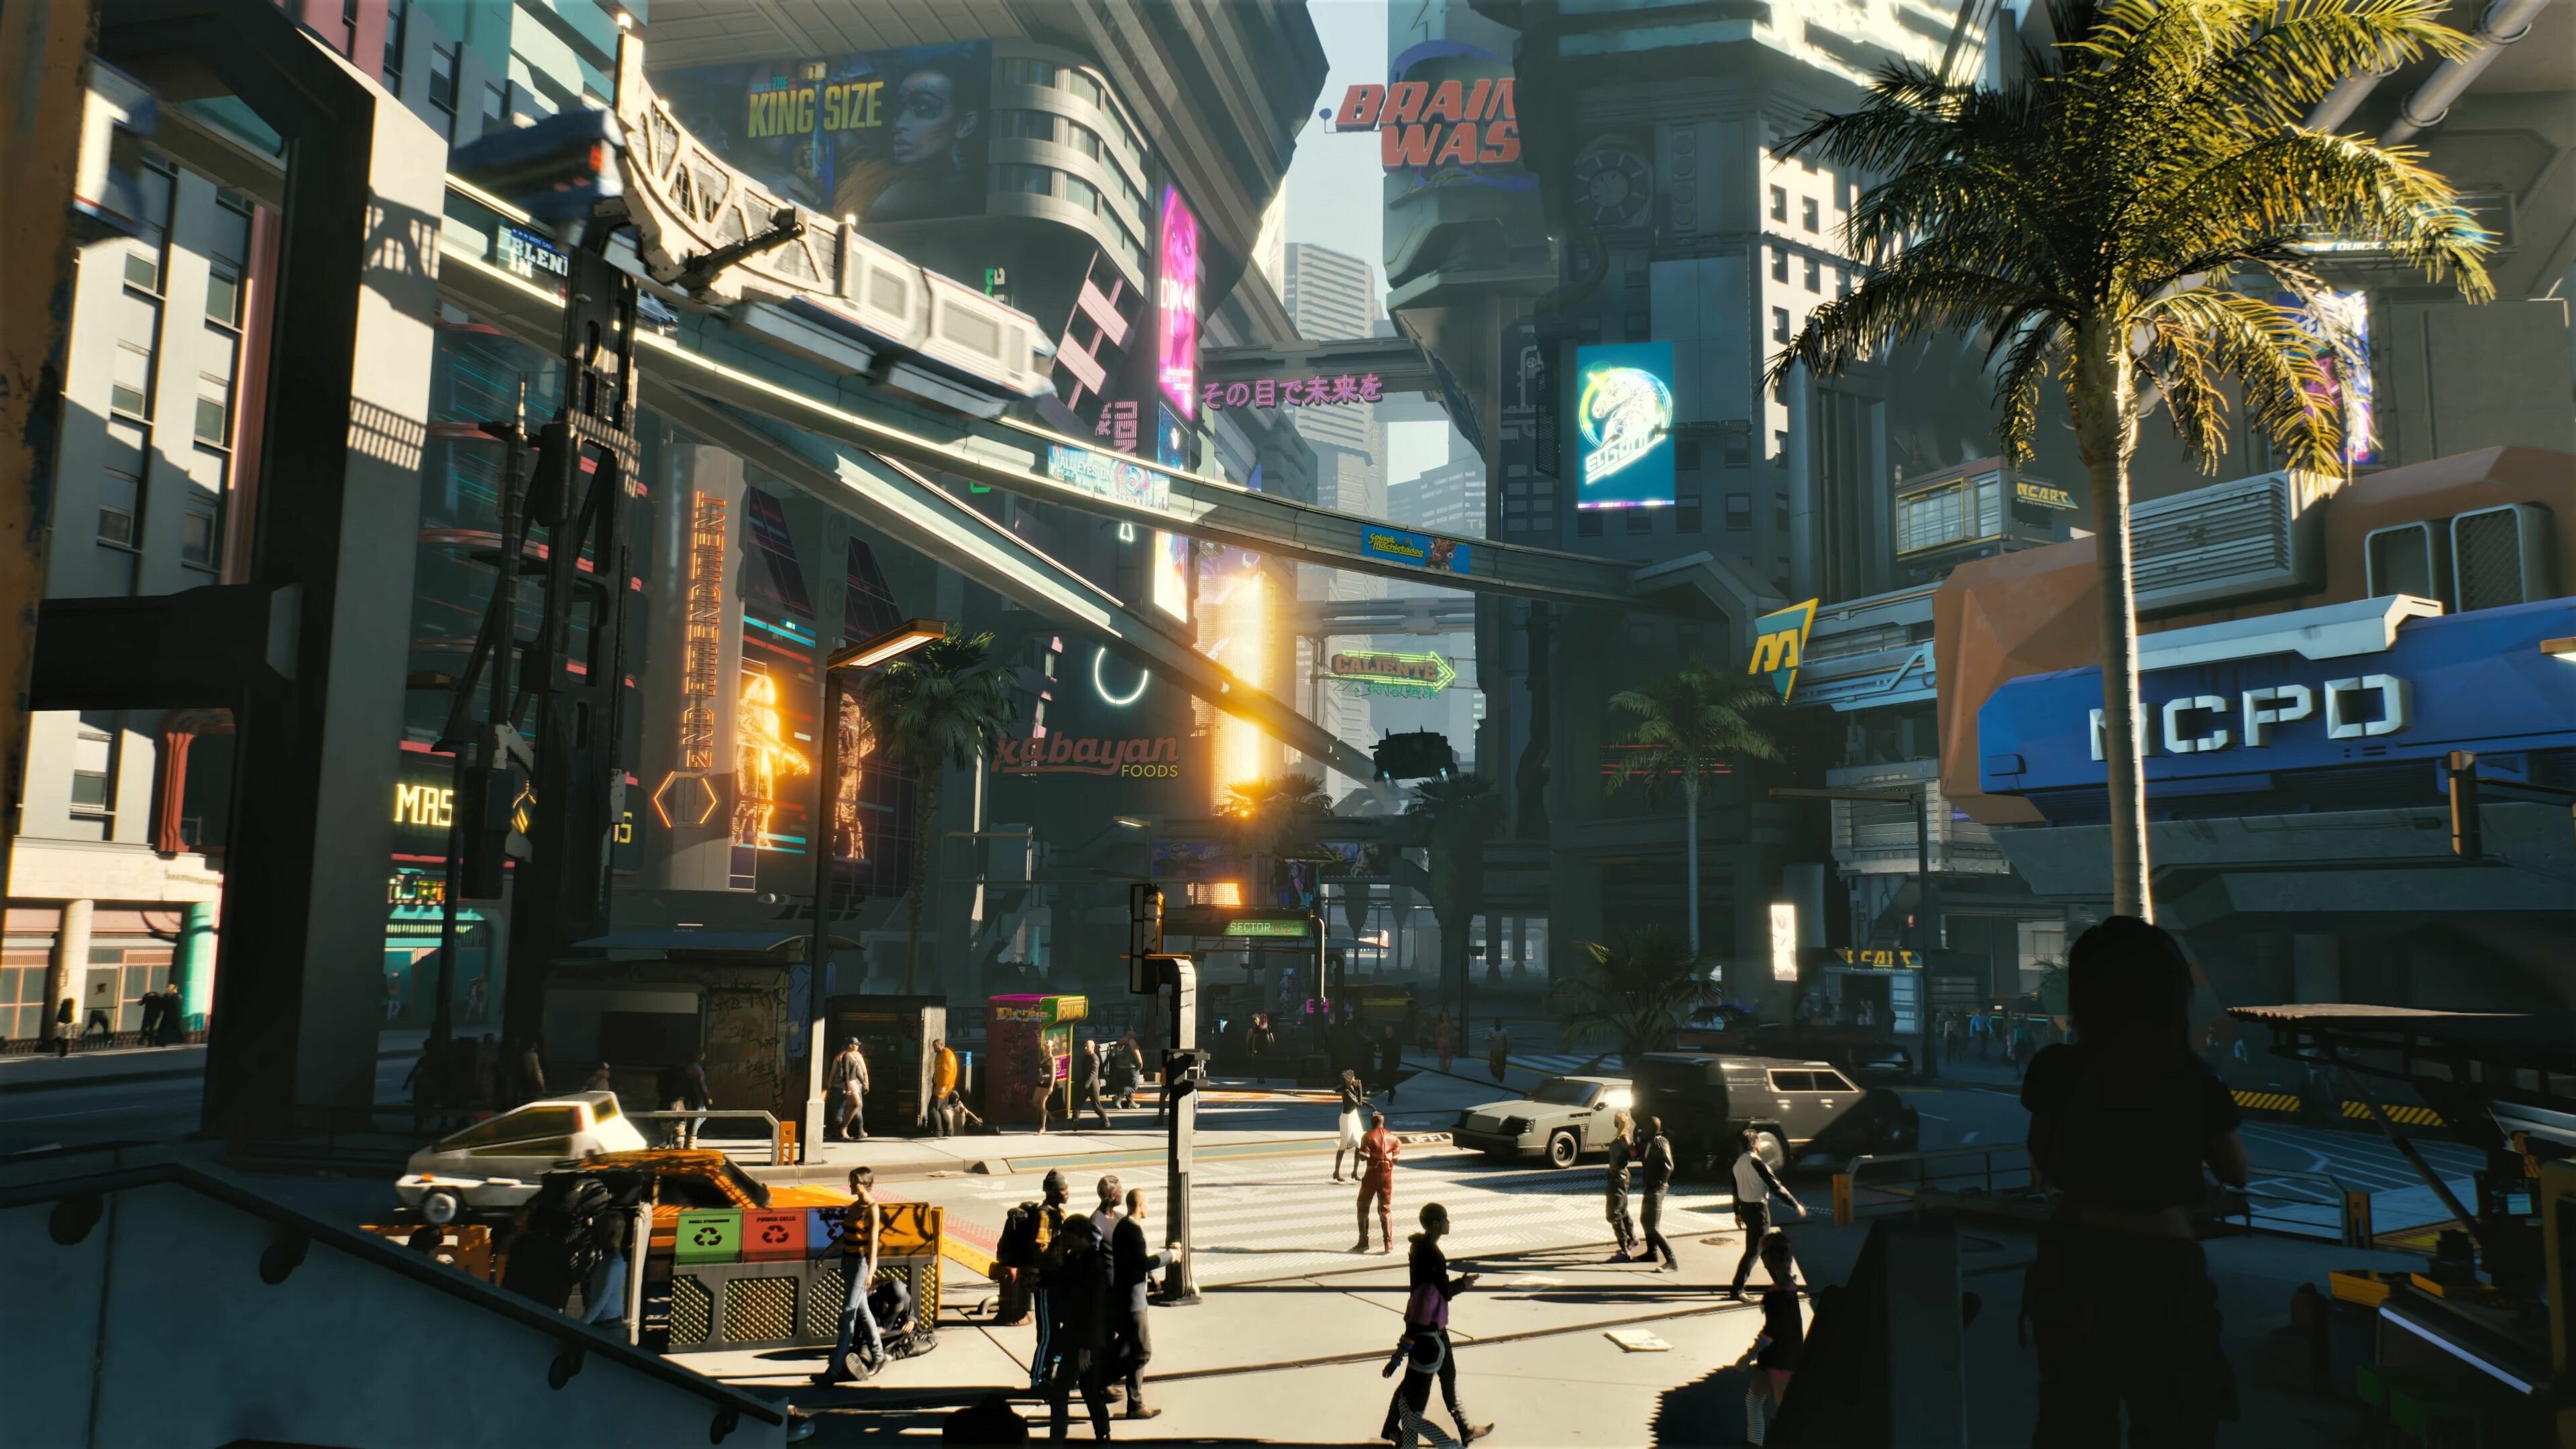 Cyberpunk 2077: It is based on Mike Pondsmith's role-playing game franchise, Pondsmith started consulting on the project in 2012. 3840x2160 4K Background.